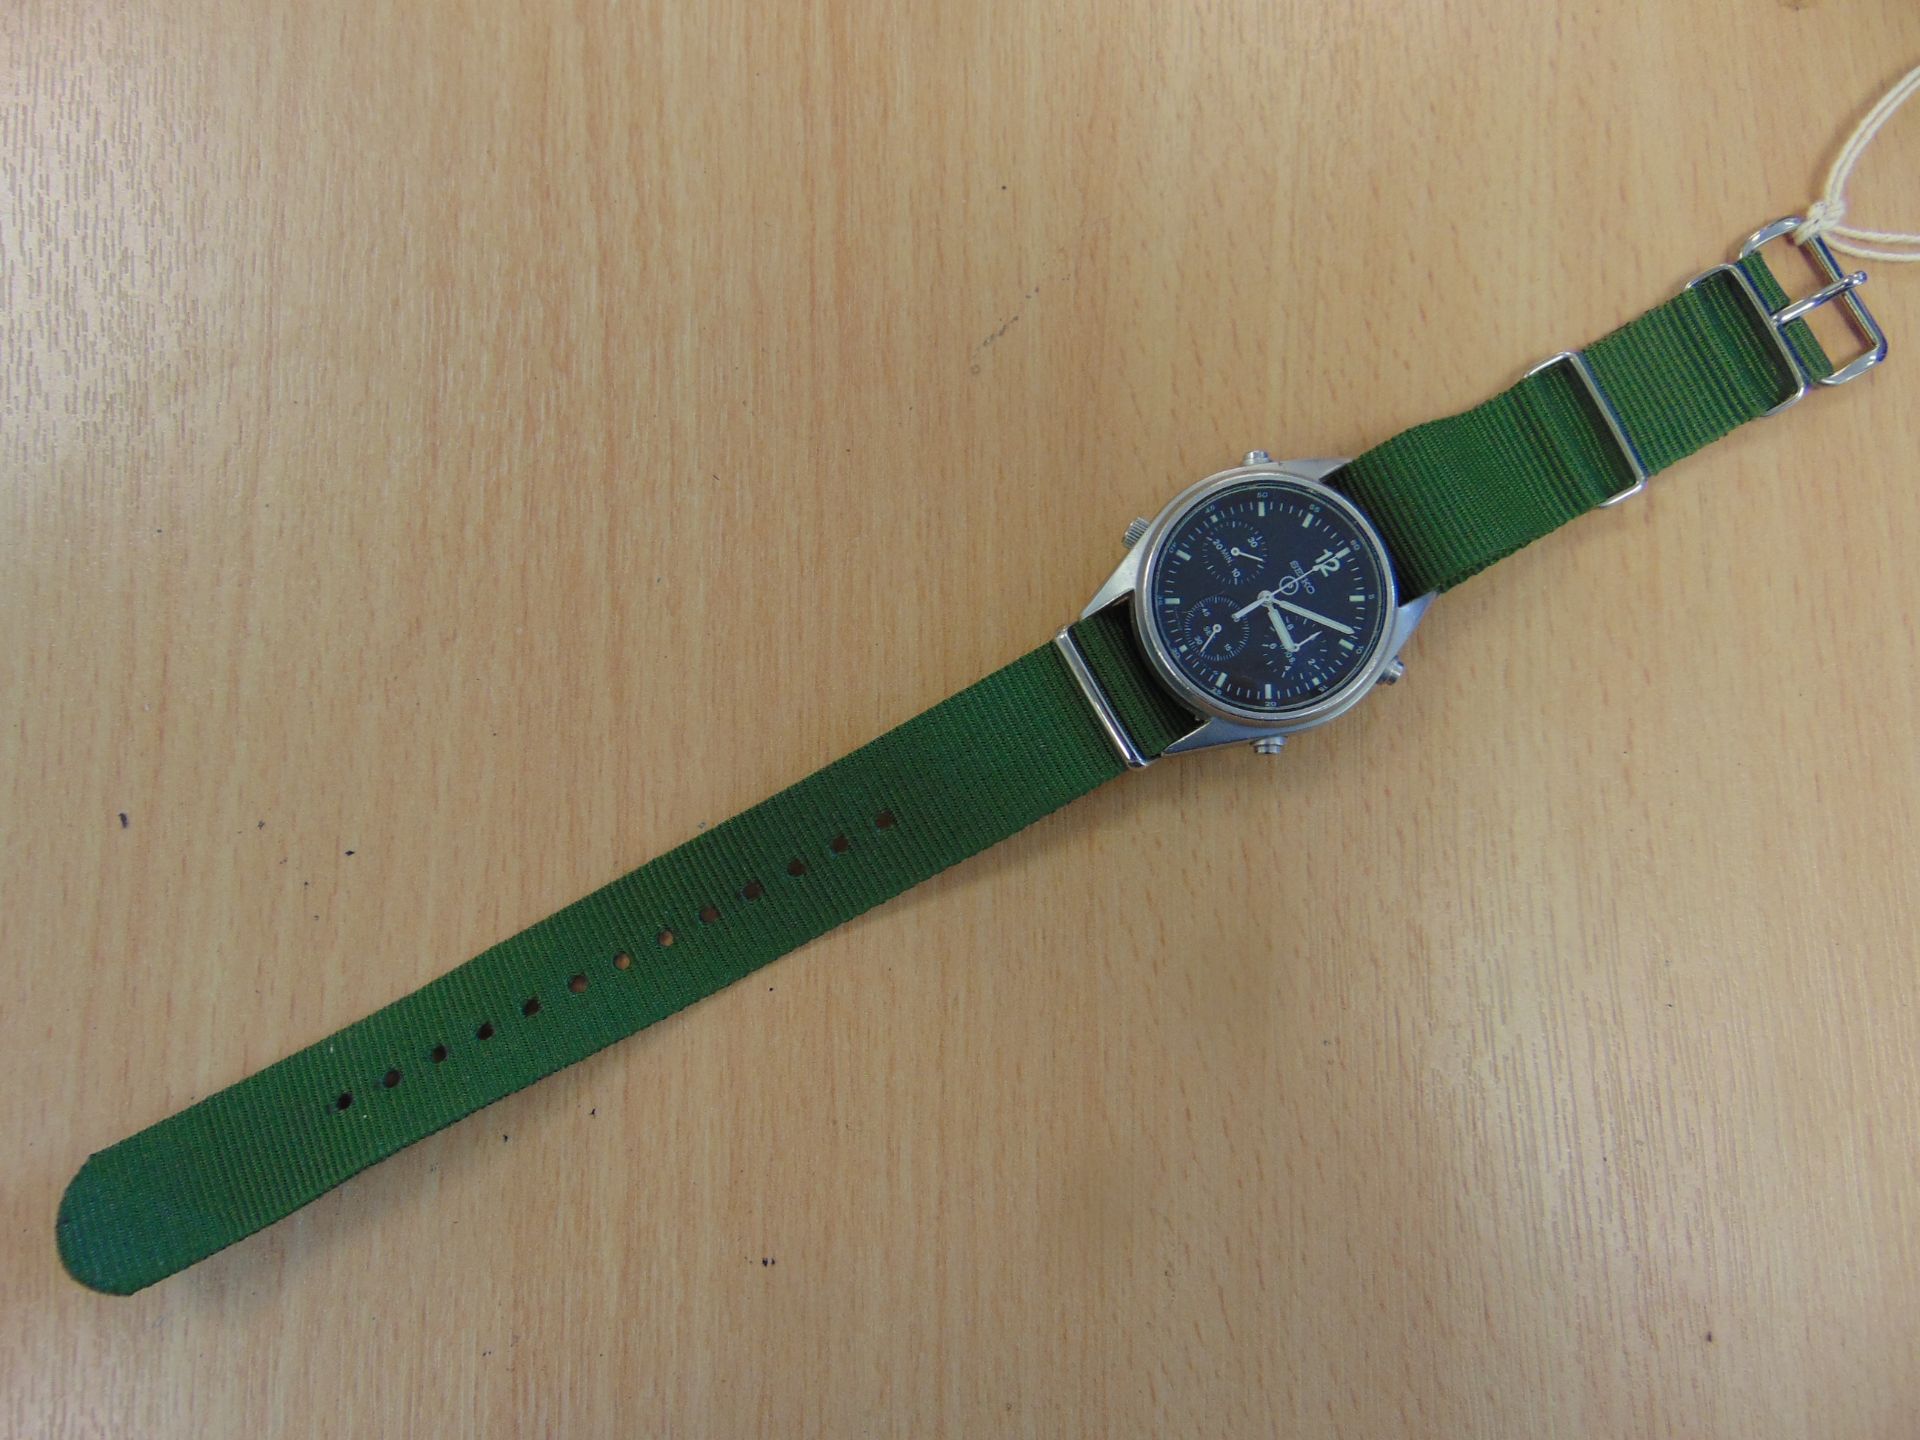 SEIKO GEN 1 PILOTS CHRONO RAF ISSUE WATCH NATO MARKINGS DATED 1989 AS ISSUED TO HARRIER FORCE - Image 10 of 10